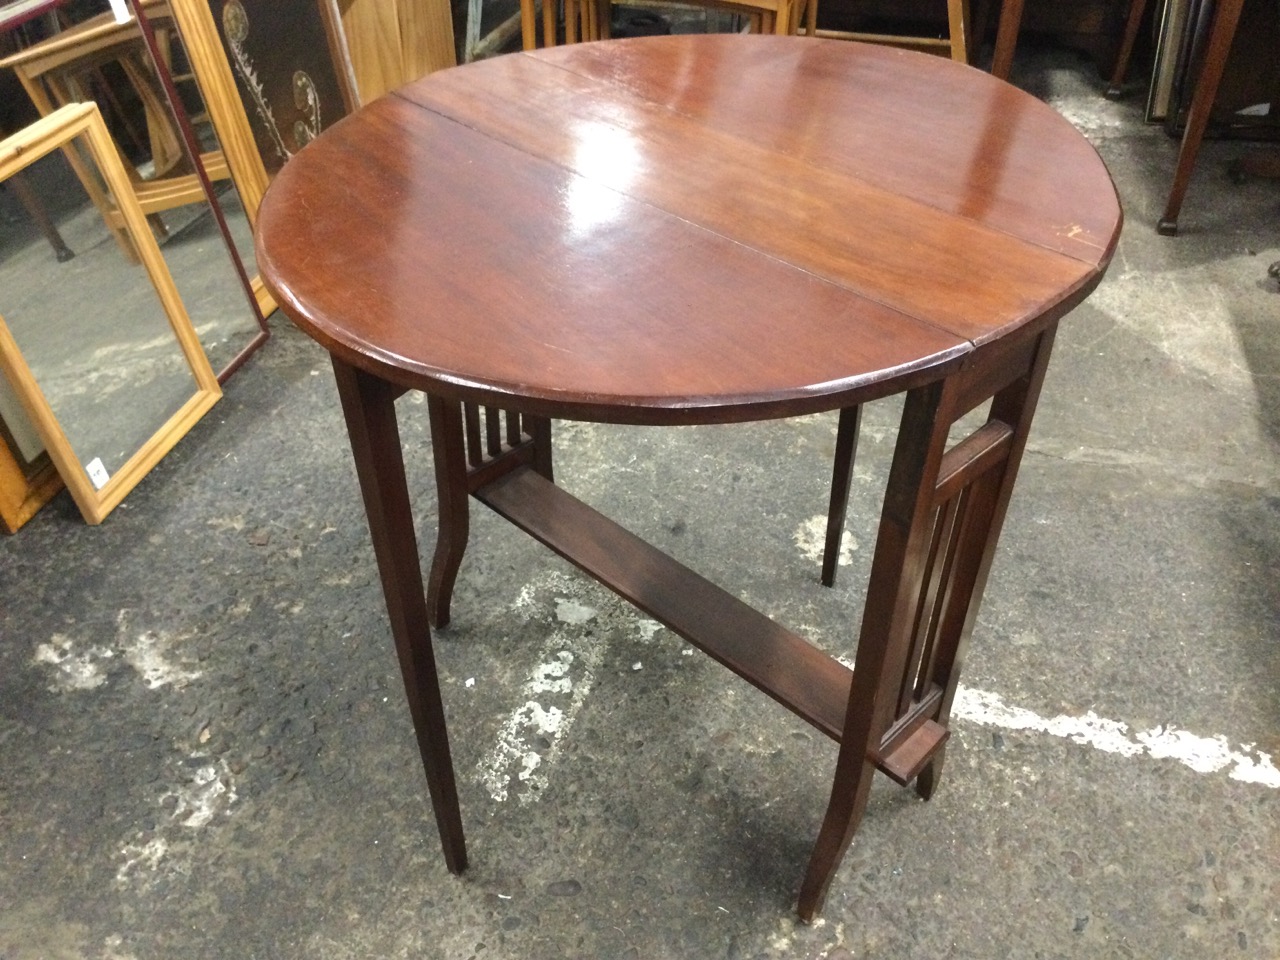 An Edwardian mahogany sutherland table with oval moulded top and two leaves - Image 2 of 3